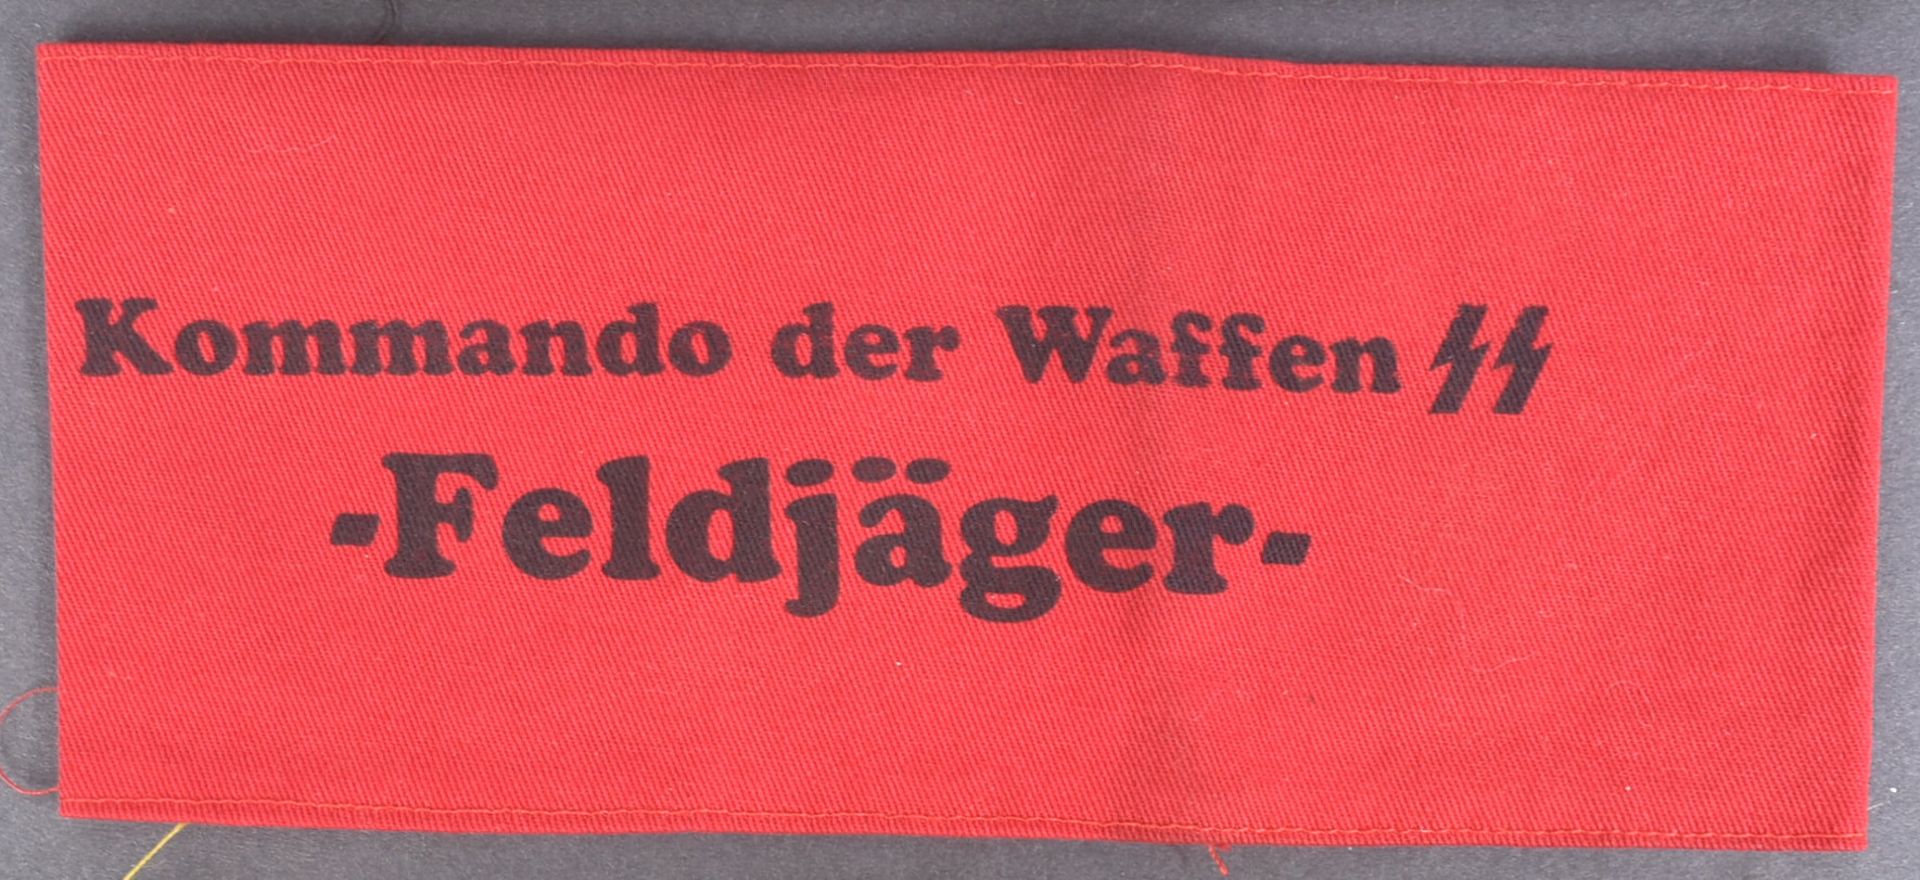 COLLECTION OF SECOND WORLD WAR GERMAN SS INTEREST ARMBANDS - Image 3 of 5